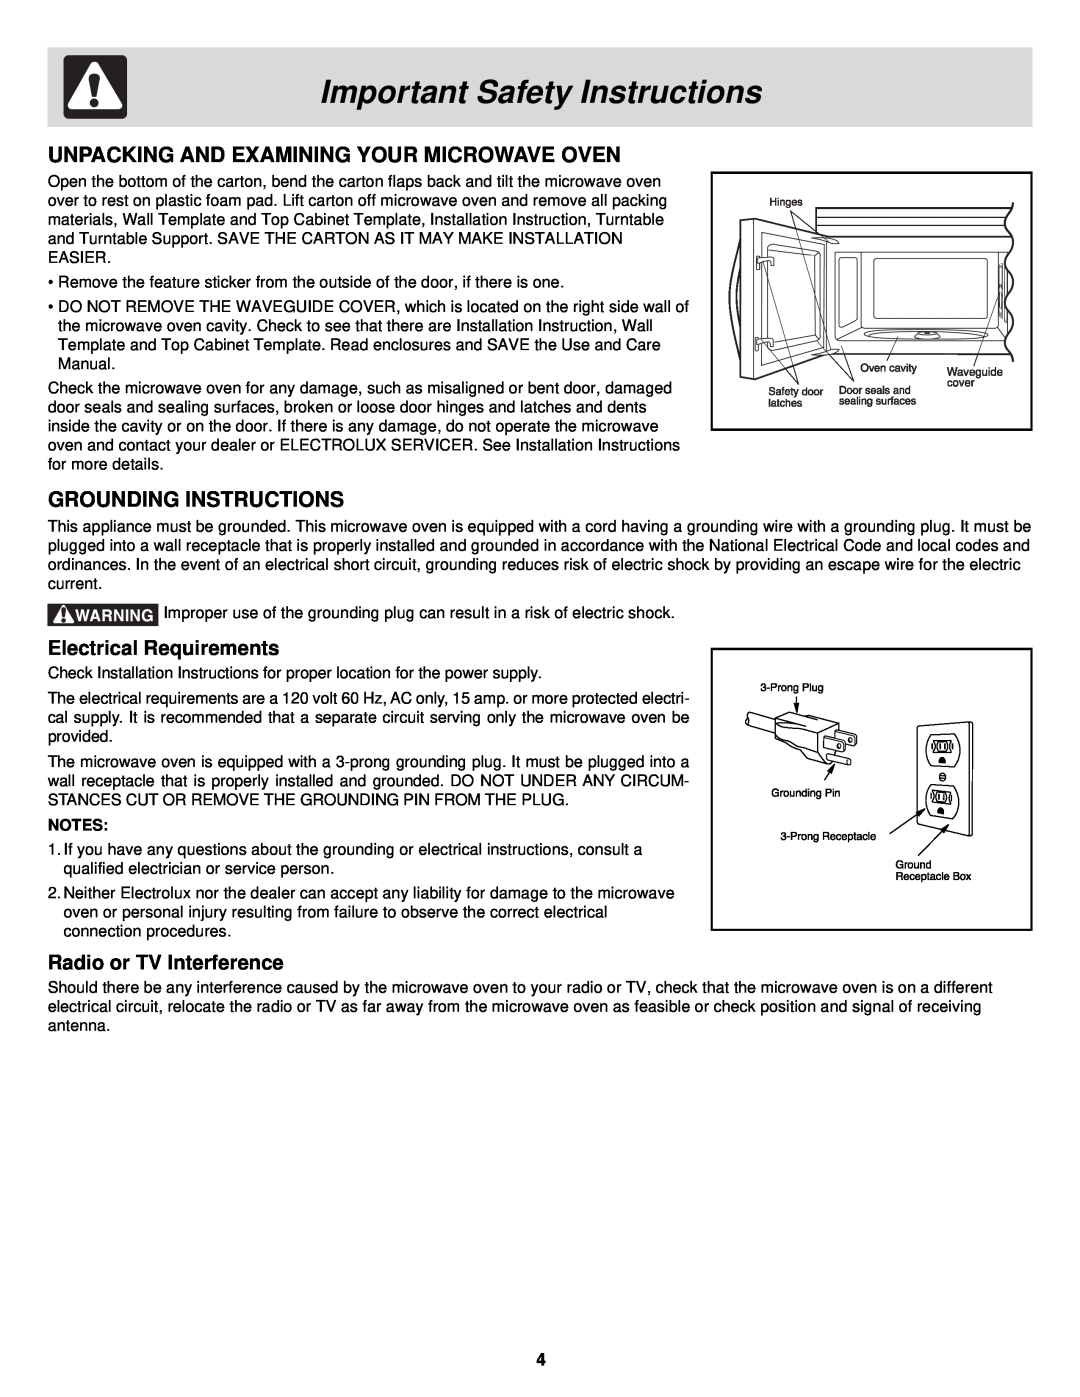 Frigidaire FMV156DB, DC, DQ, DS Unpacking And Examining Your Microwave Oven, Grounding Instructions, Electrical Requirements 